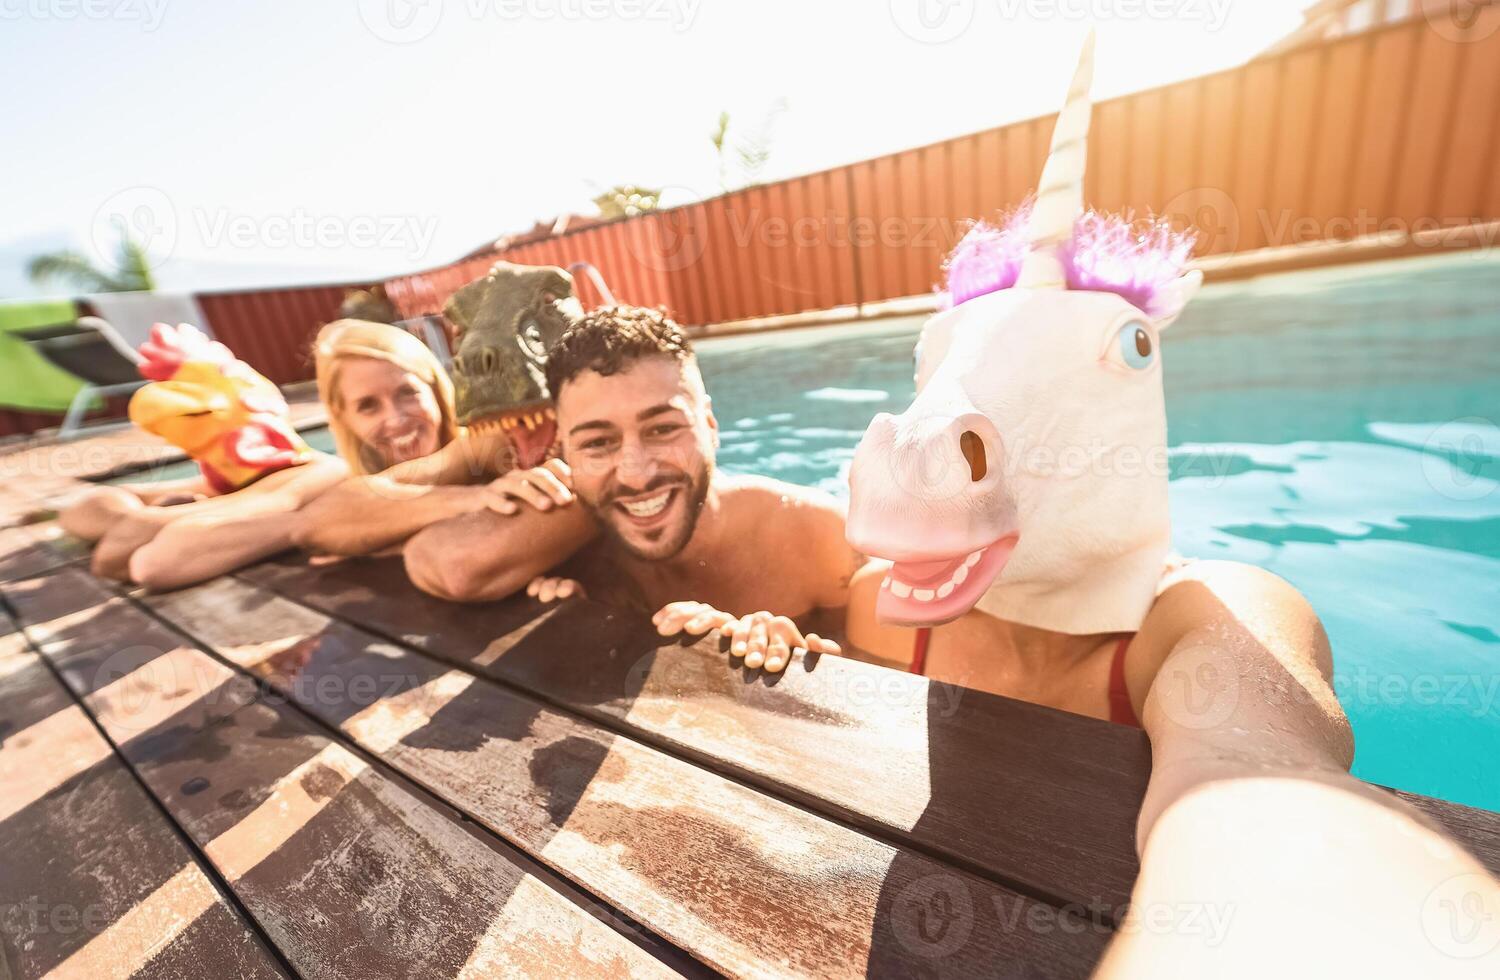 Crazy friends selfie doing pool party wearing bizarre mask - Young people having fun celebrating summer in exclusive tropical resort - Friendship and youth holidays lifestyle concept photo